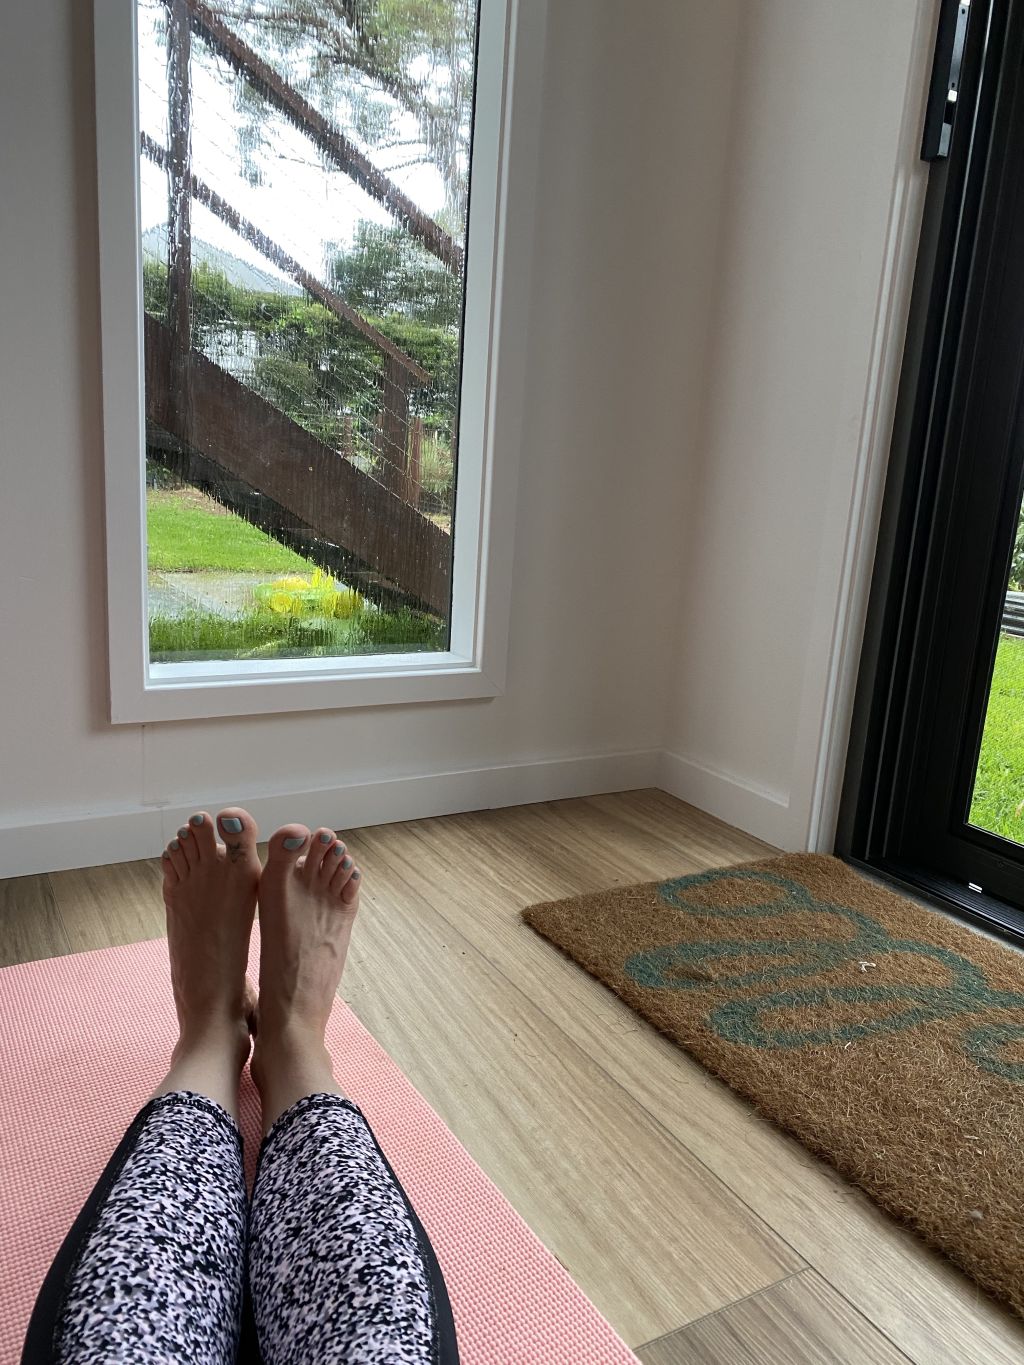 A perfect space for a yoga session. Photo: Supplied